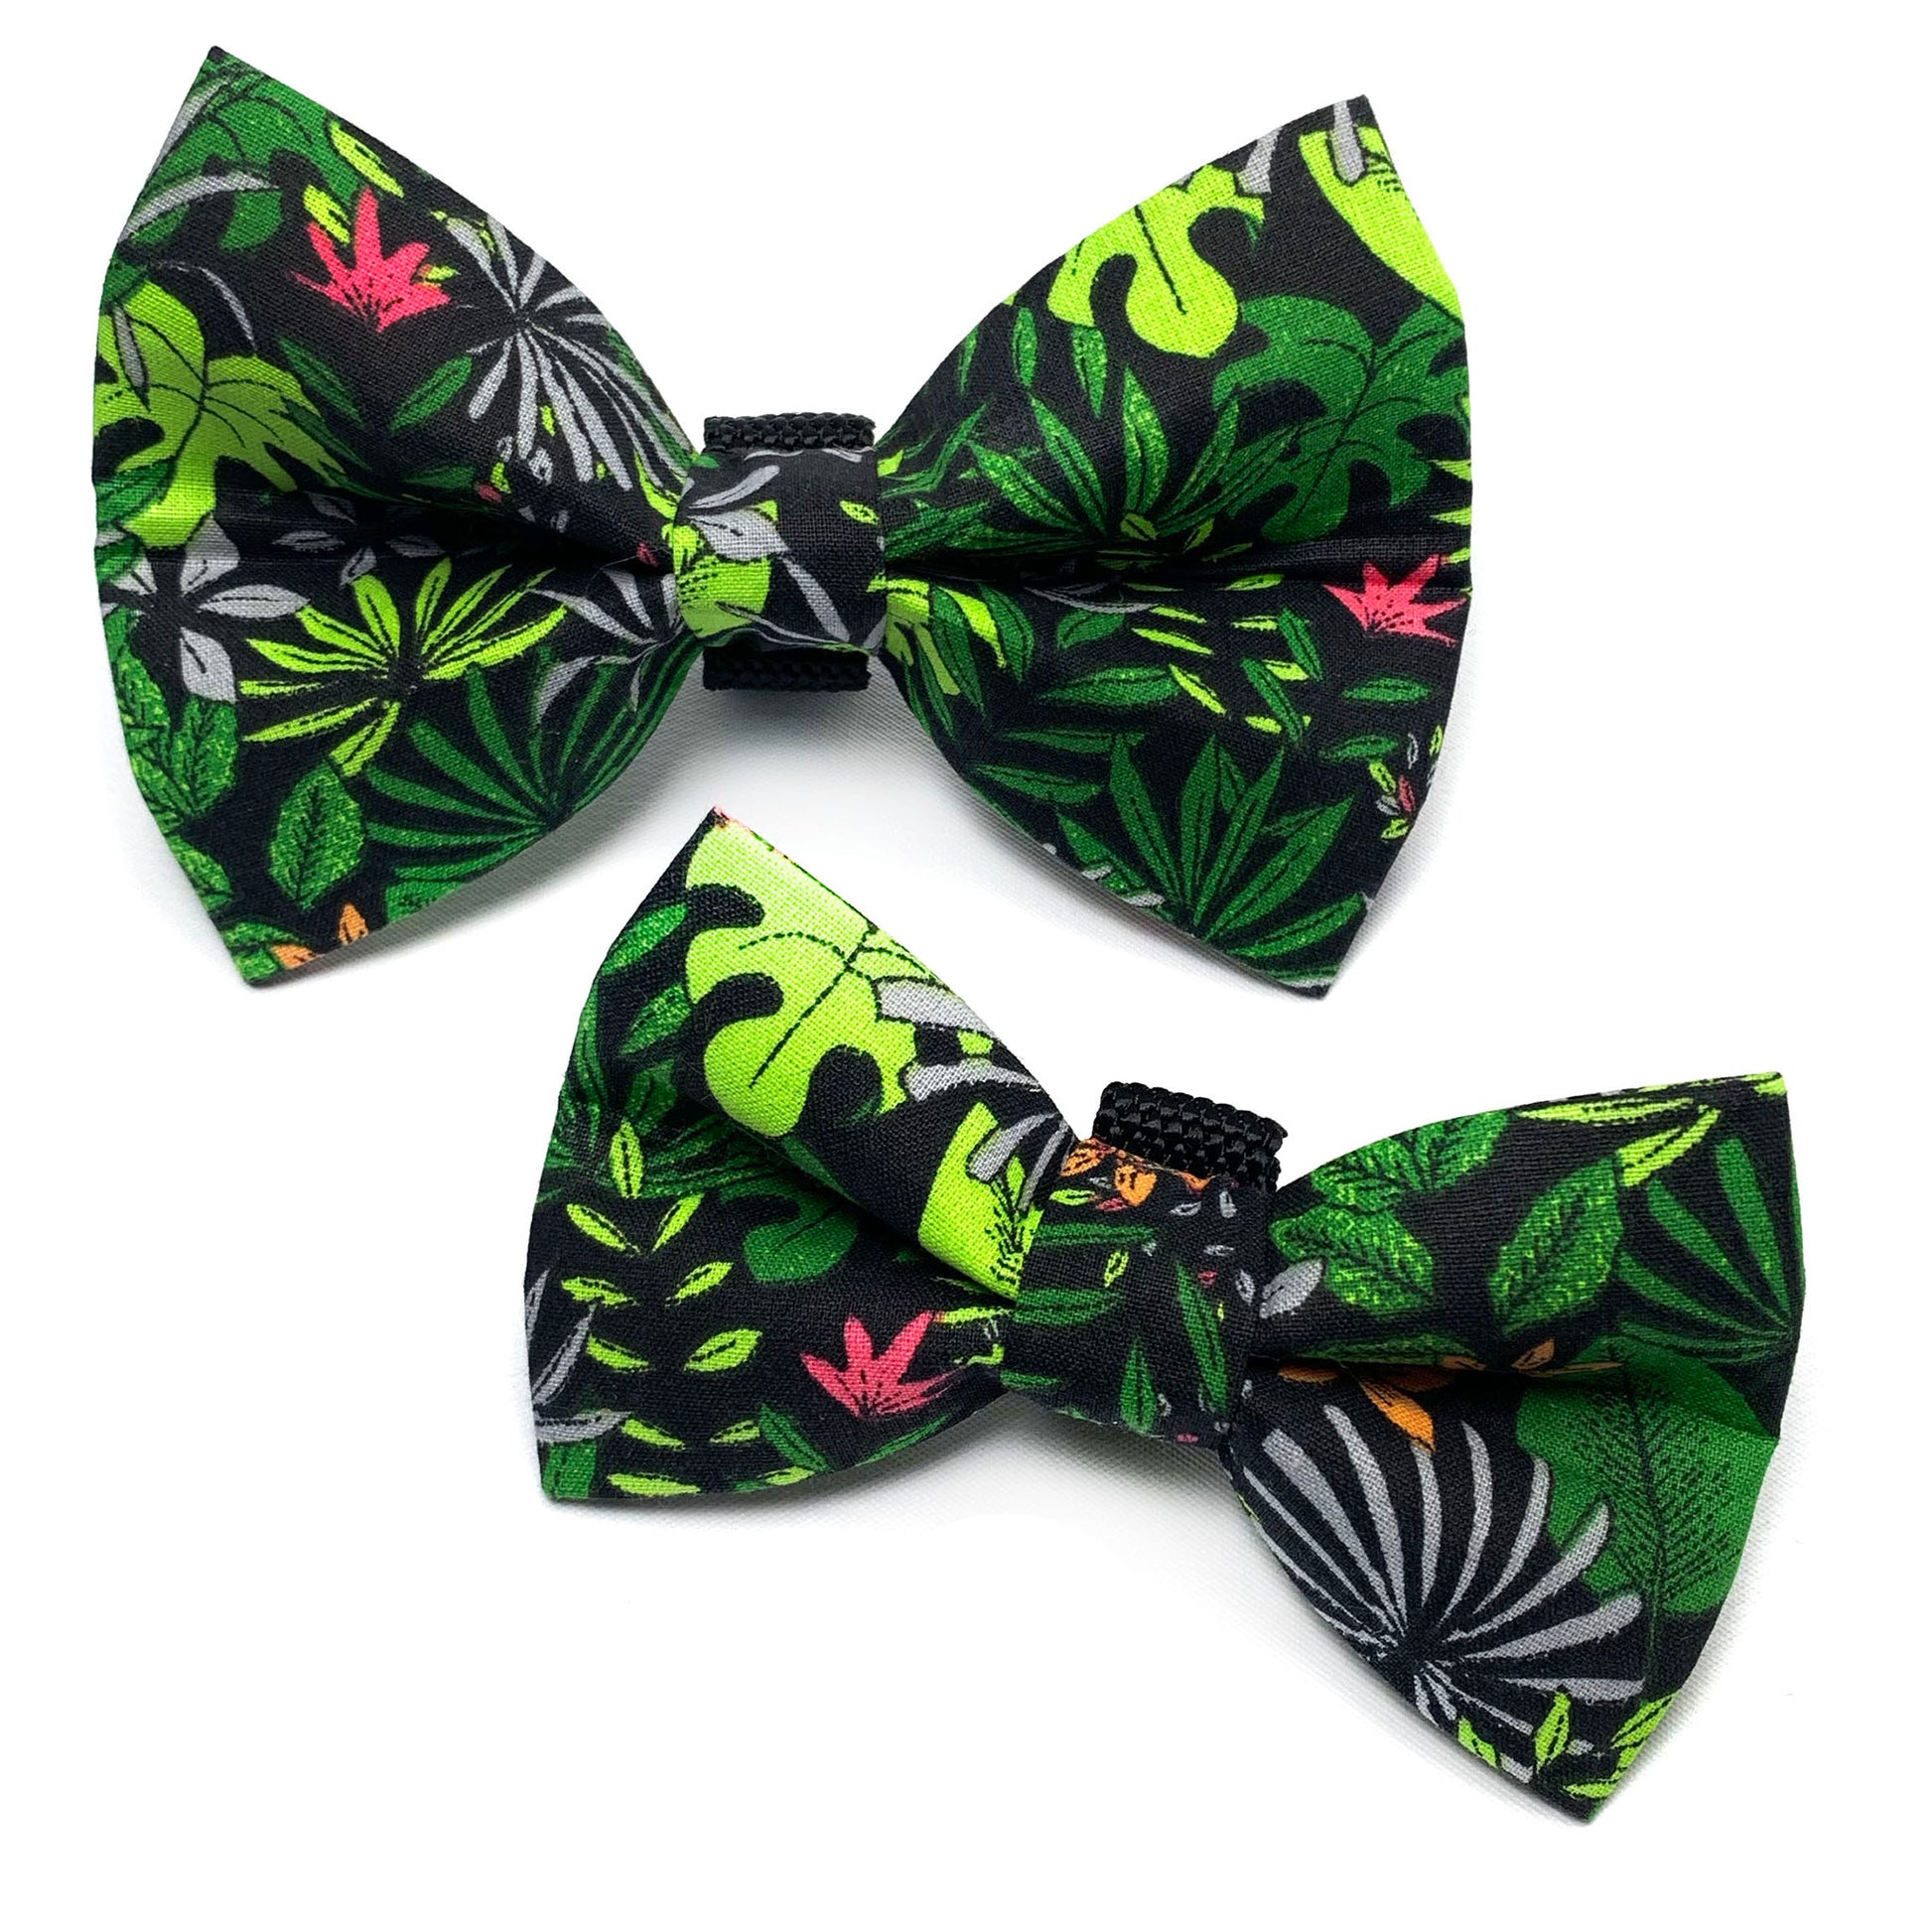 Tropical Leaves Dog Bow Tie